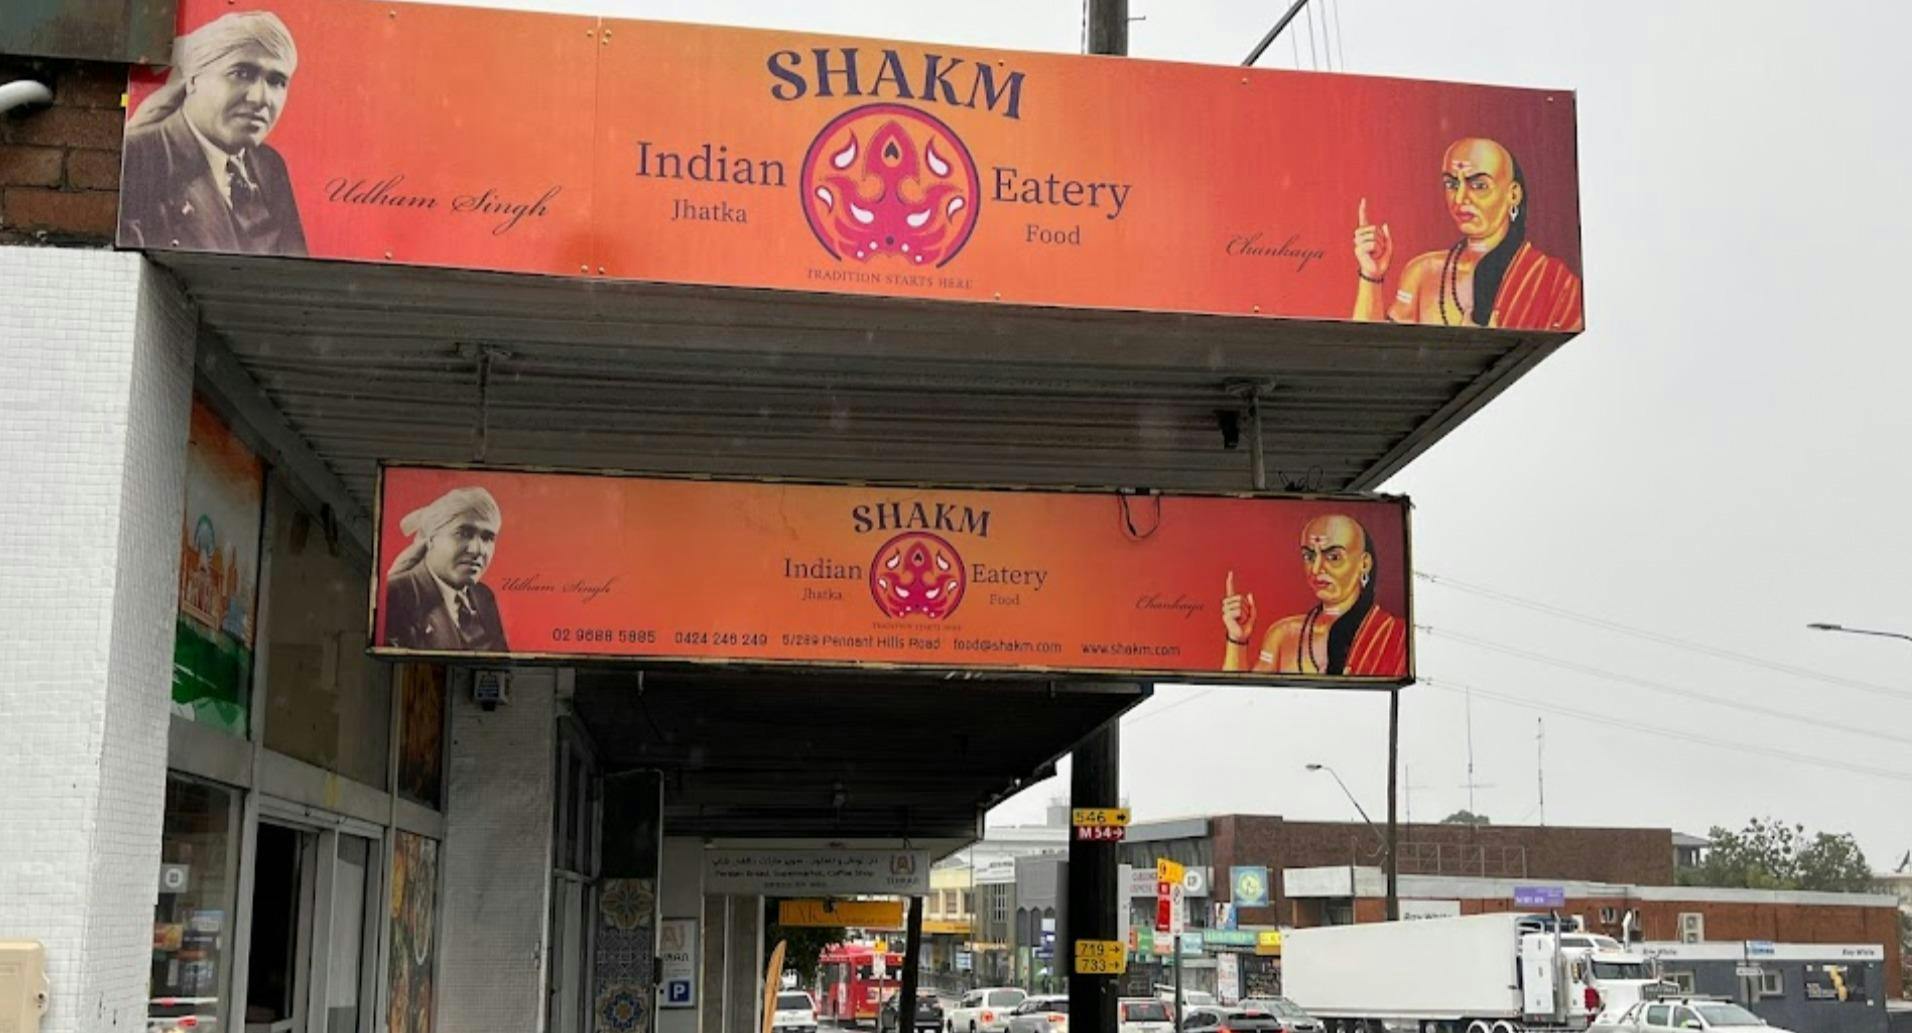 Photo of restaurant Shakm Indian Eatery in Carlingford, Sydney